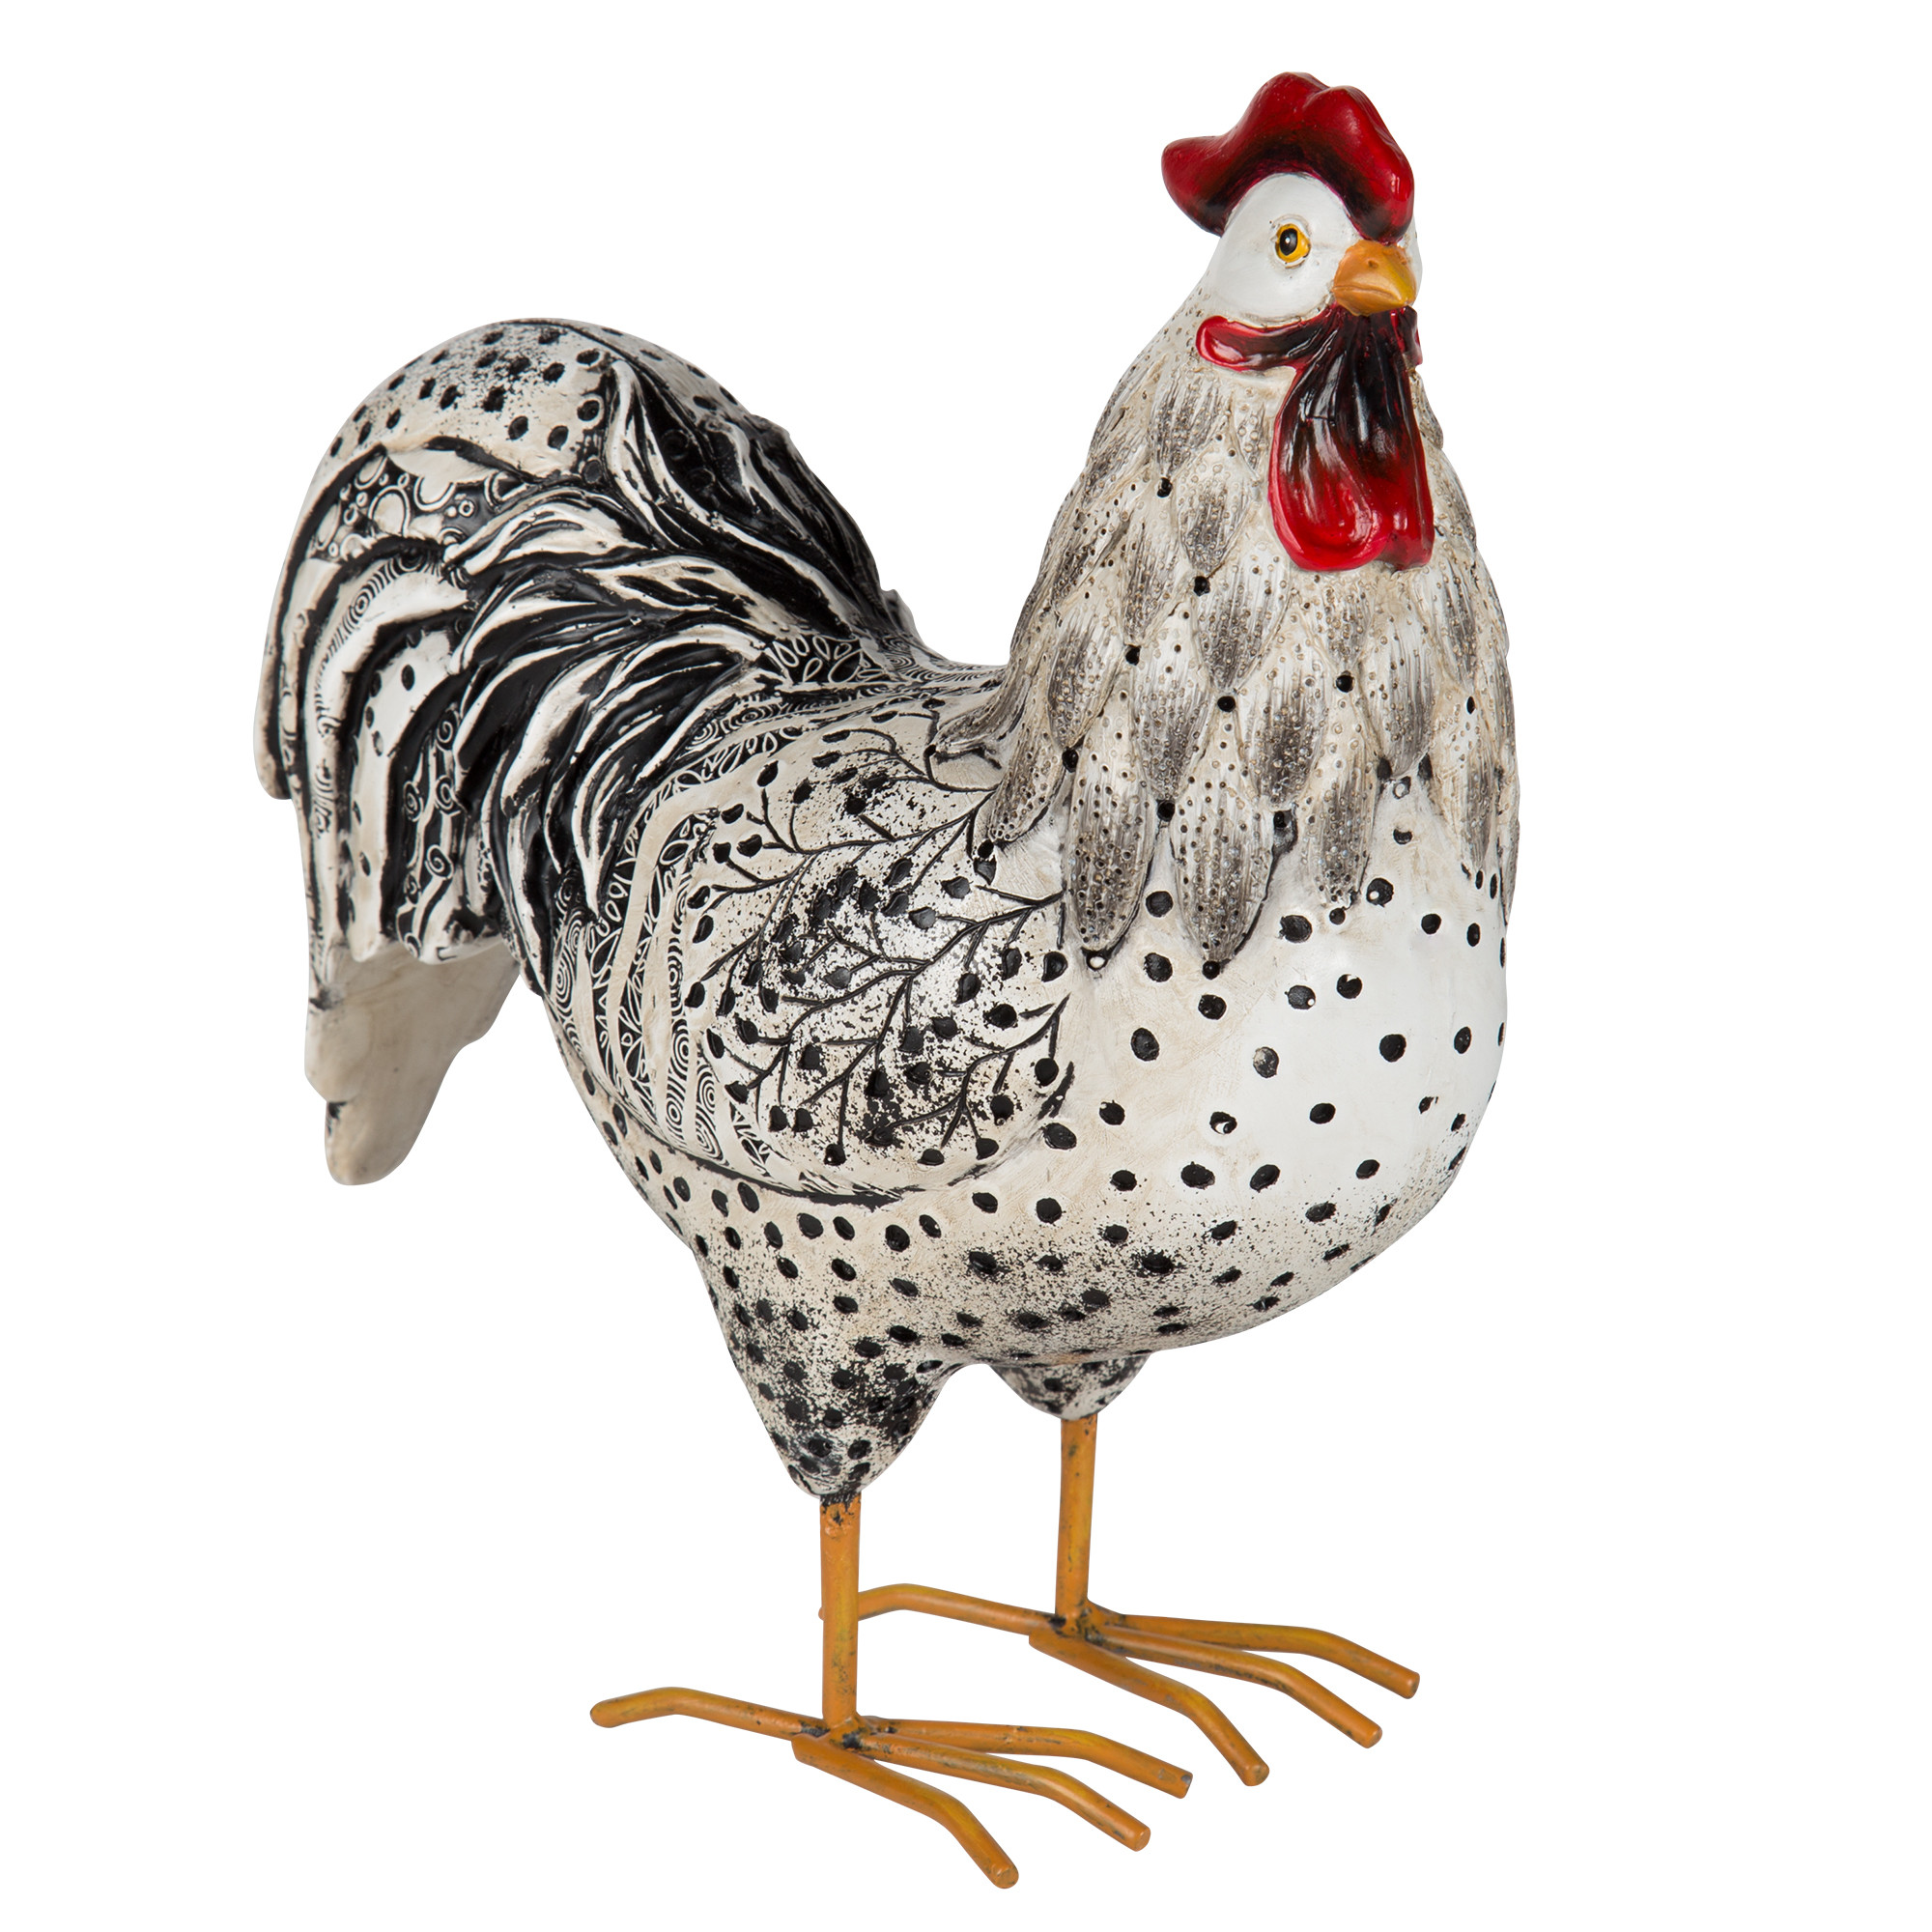 Better Homes & Gardens 9" Rustic Red & Gray Farmhouse Chicken Figurine - image 1 of 5